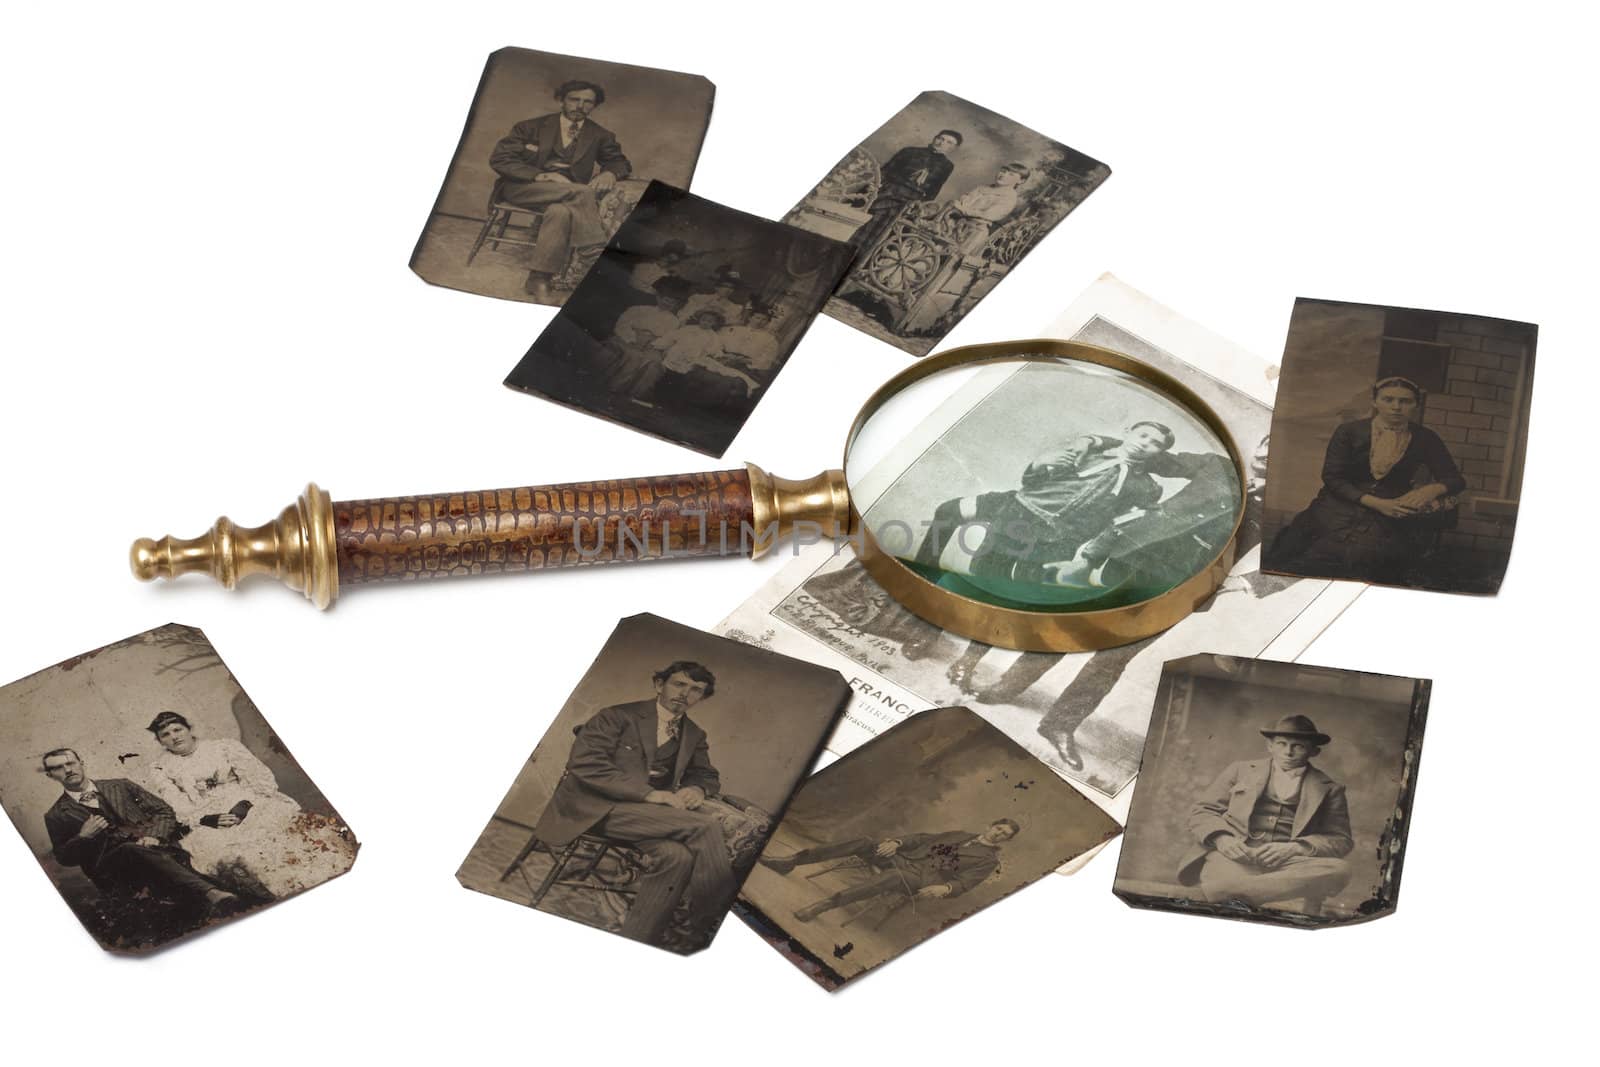 A magnifying glass on top of some ancient photographs